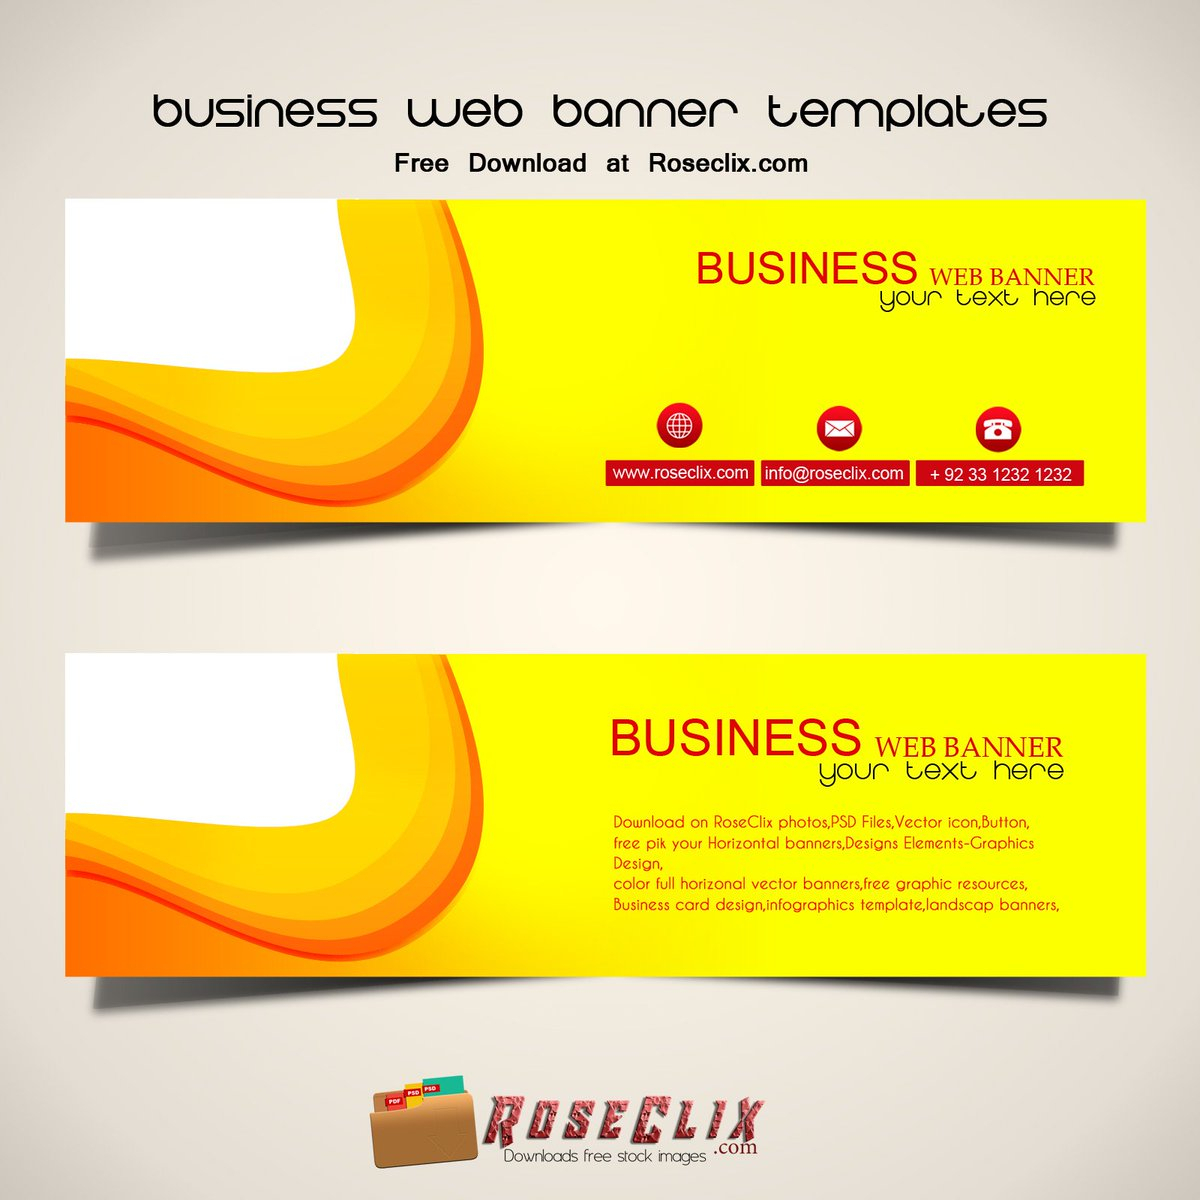 We Create Best Business Web Banner Design For You, Download Intended For Website Banner Templates Free Download